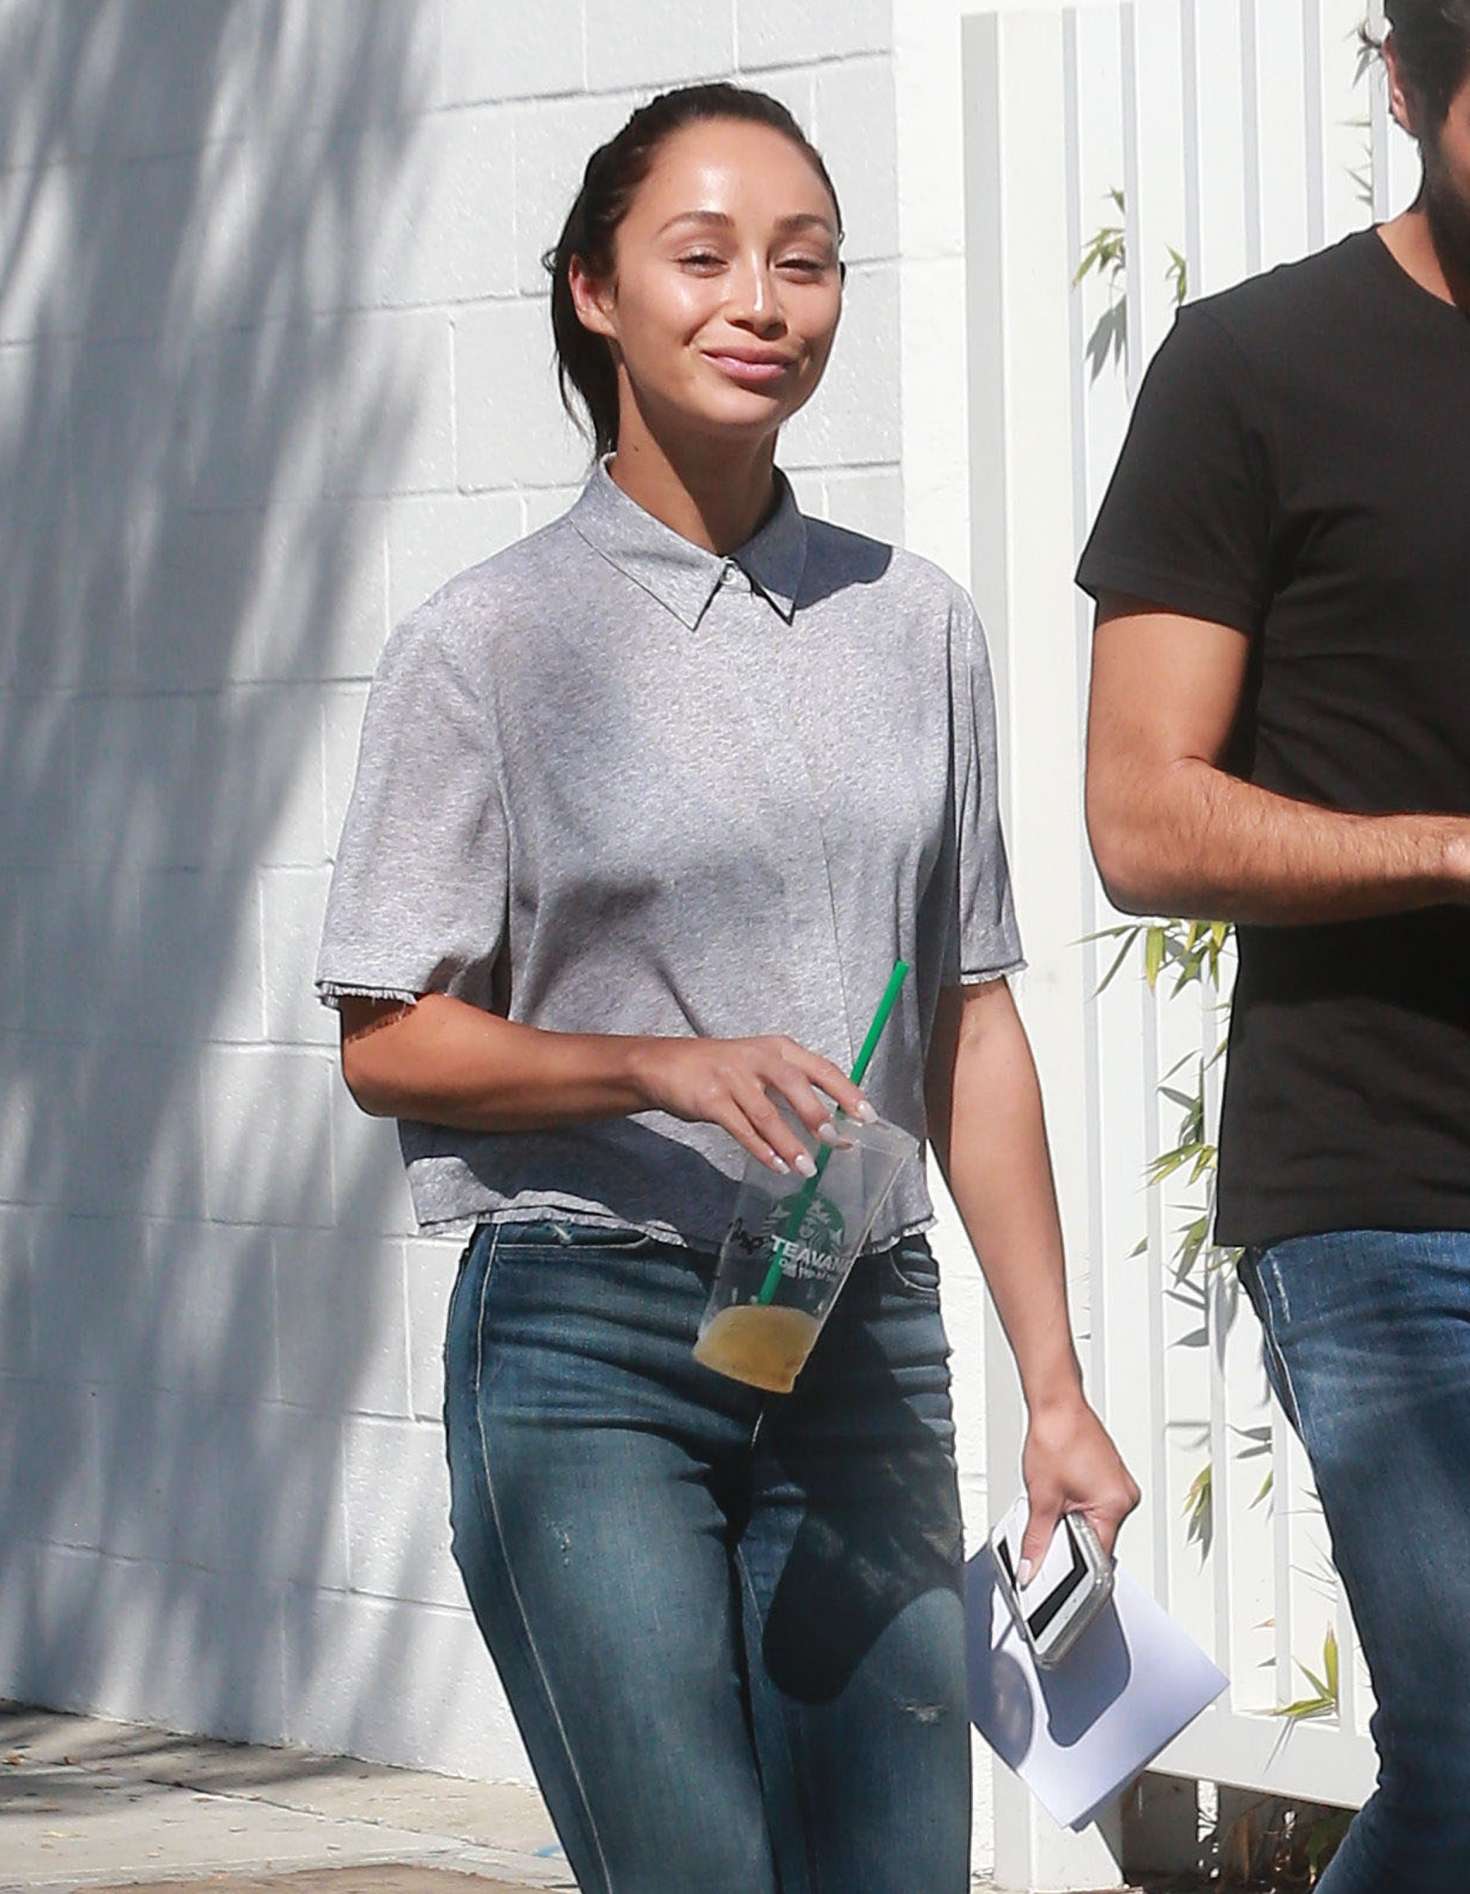 Cara Santana in Ripped Jeans out in West Hollywood